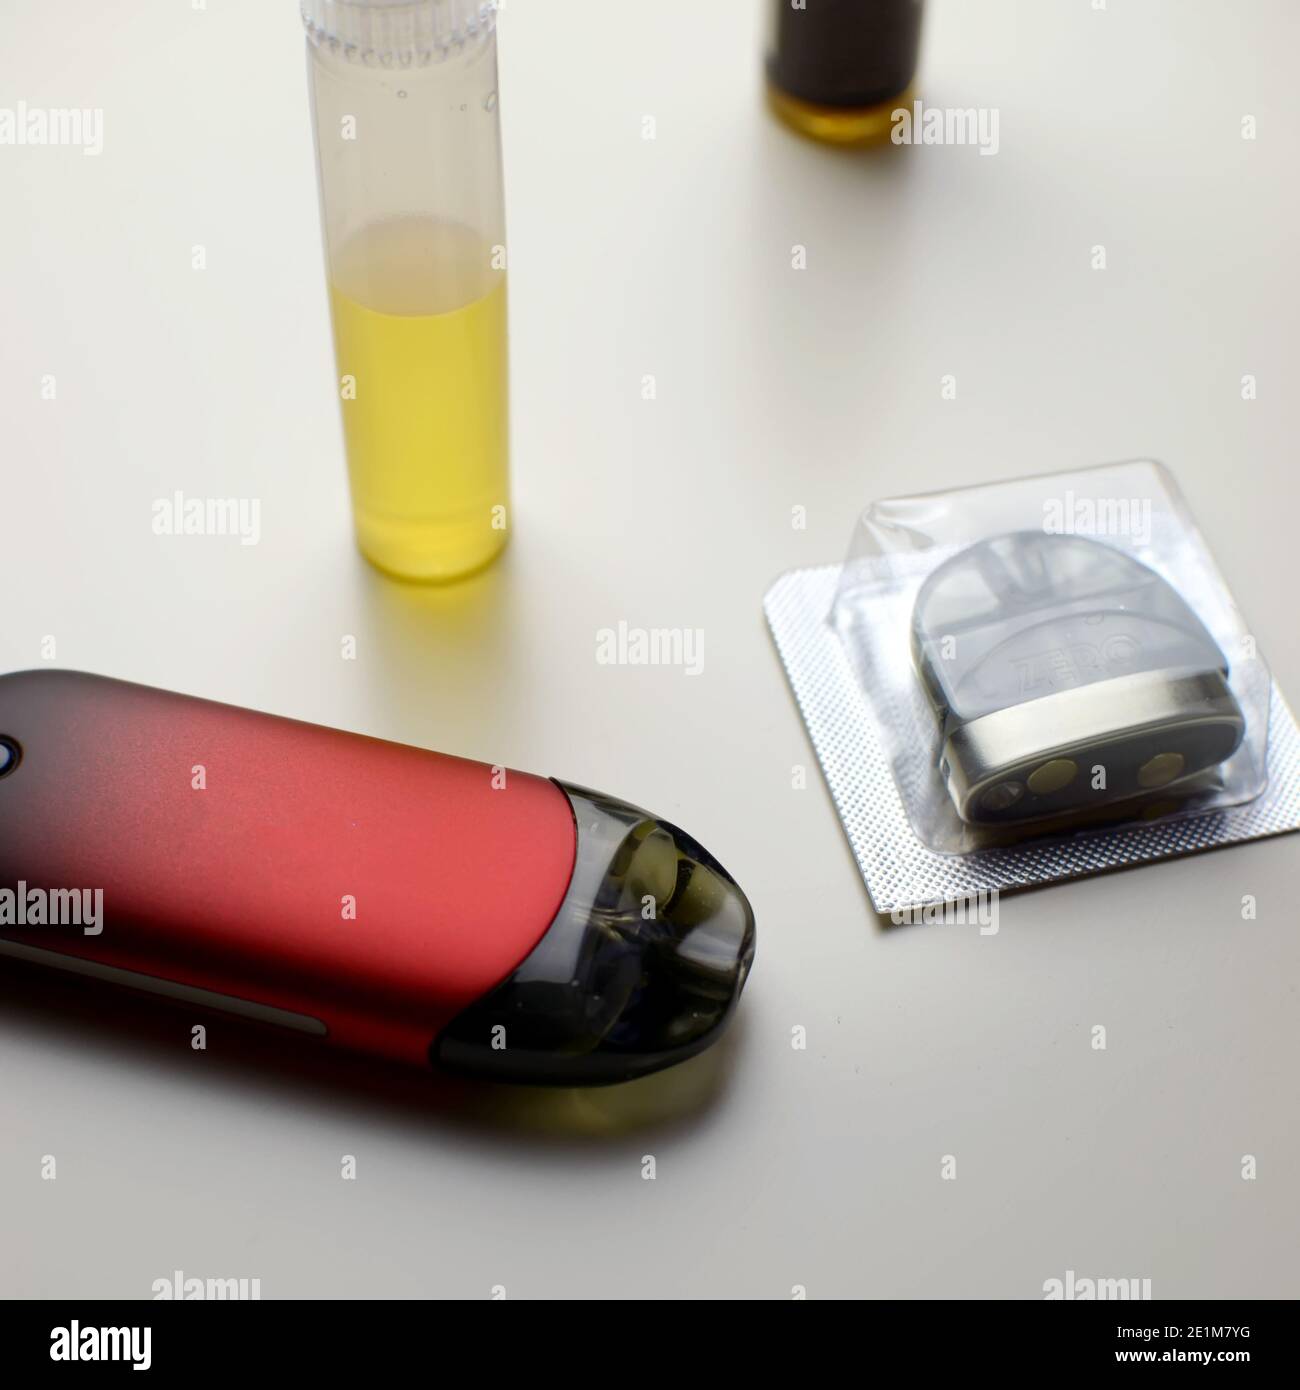 Vape pod system or pod mod with changeable cartridges , close up Stock Photo